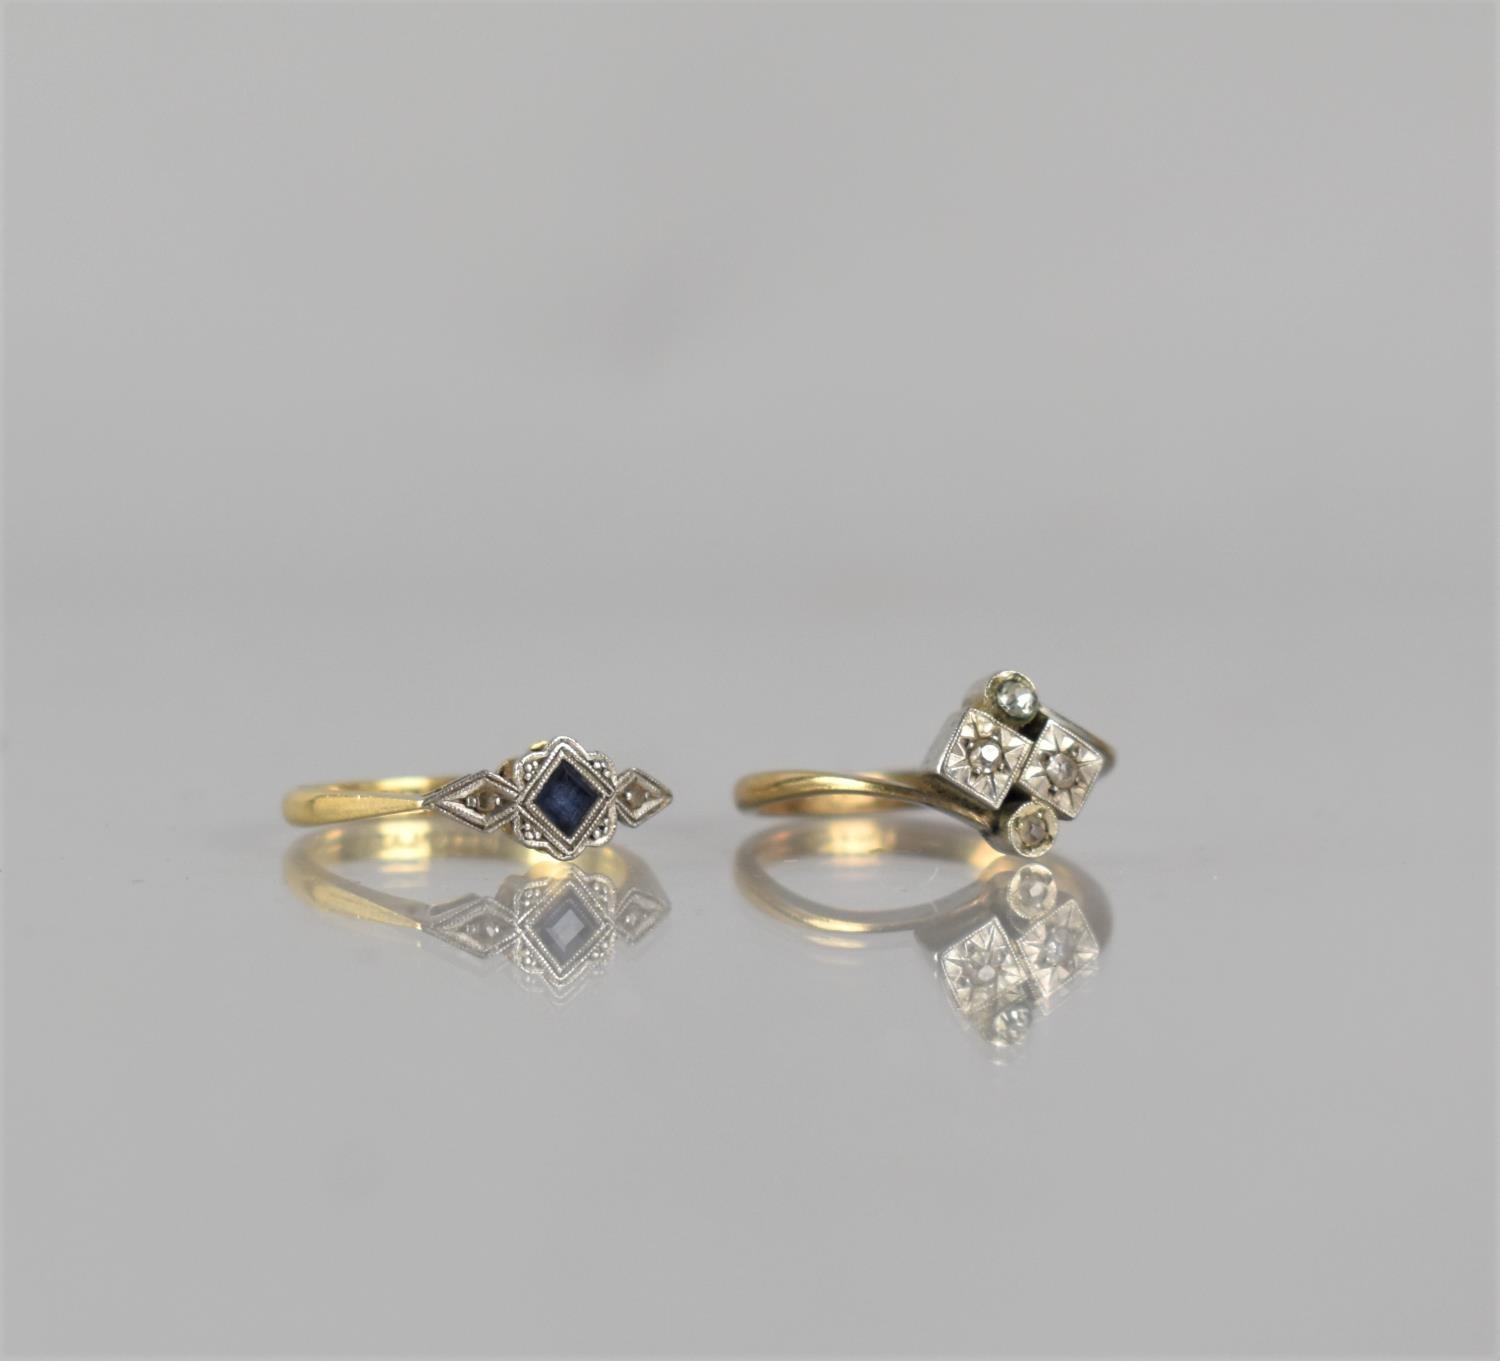 Two 18ct Gold, Platinum and Diamond Art Deco Rings, One with Centre Square Cut Sapphire, 3mm